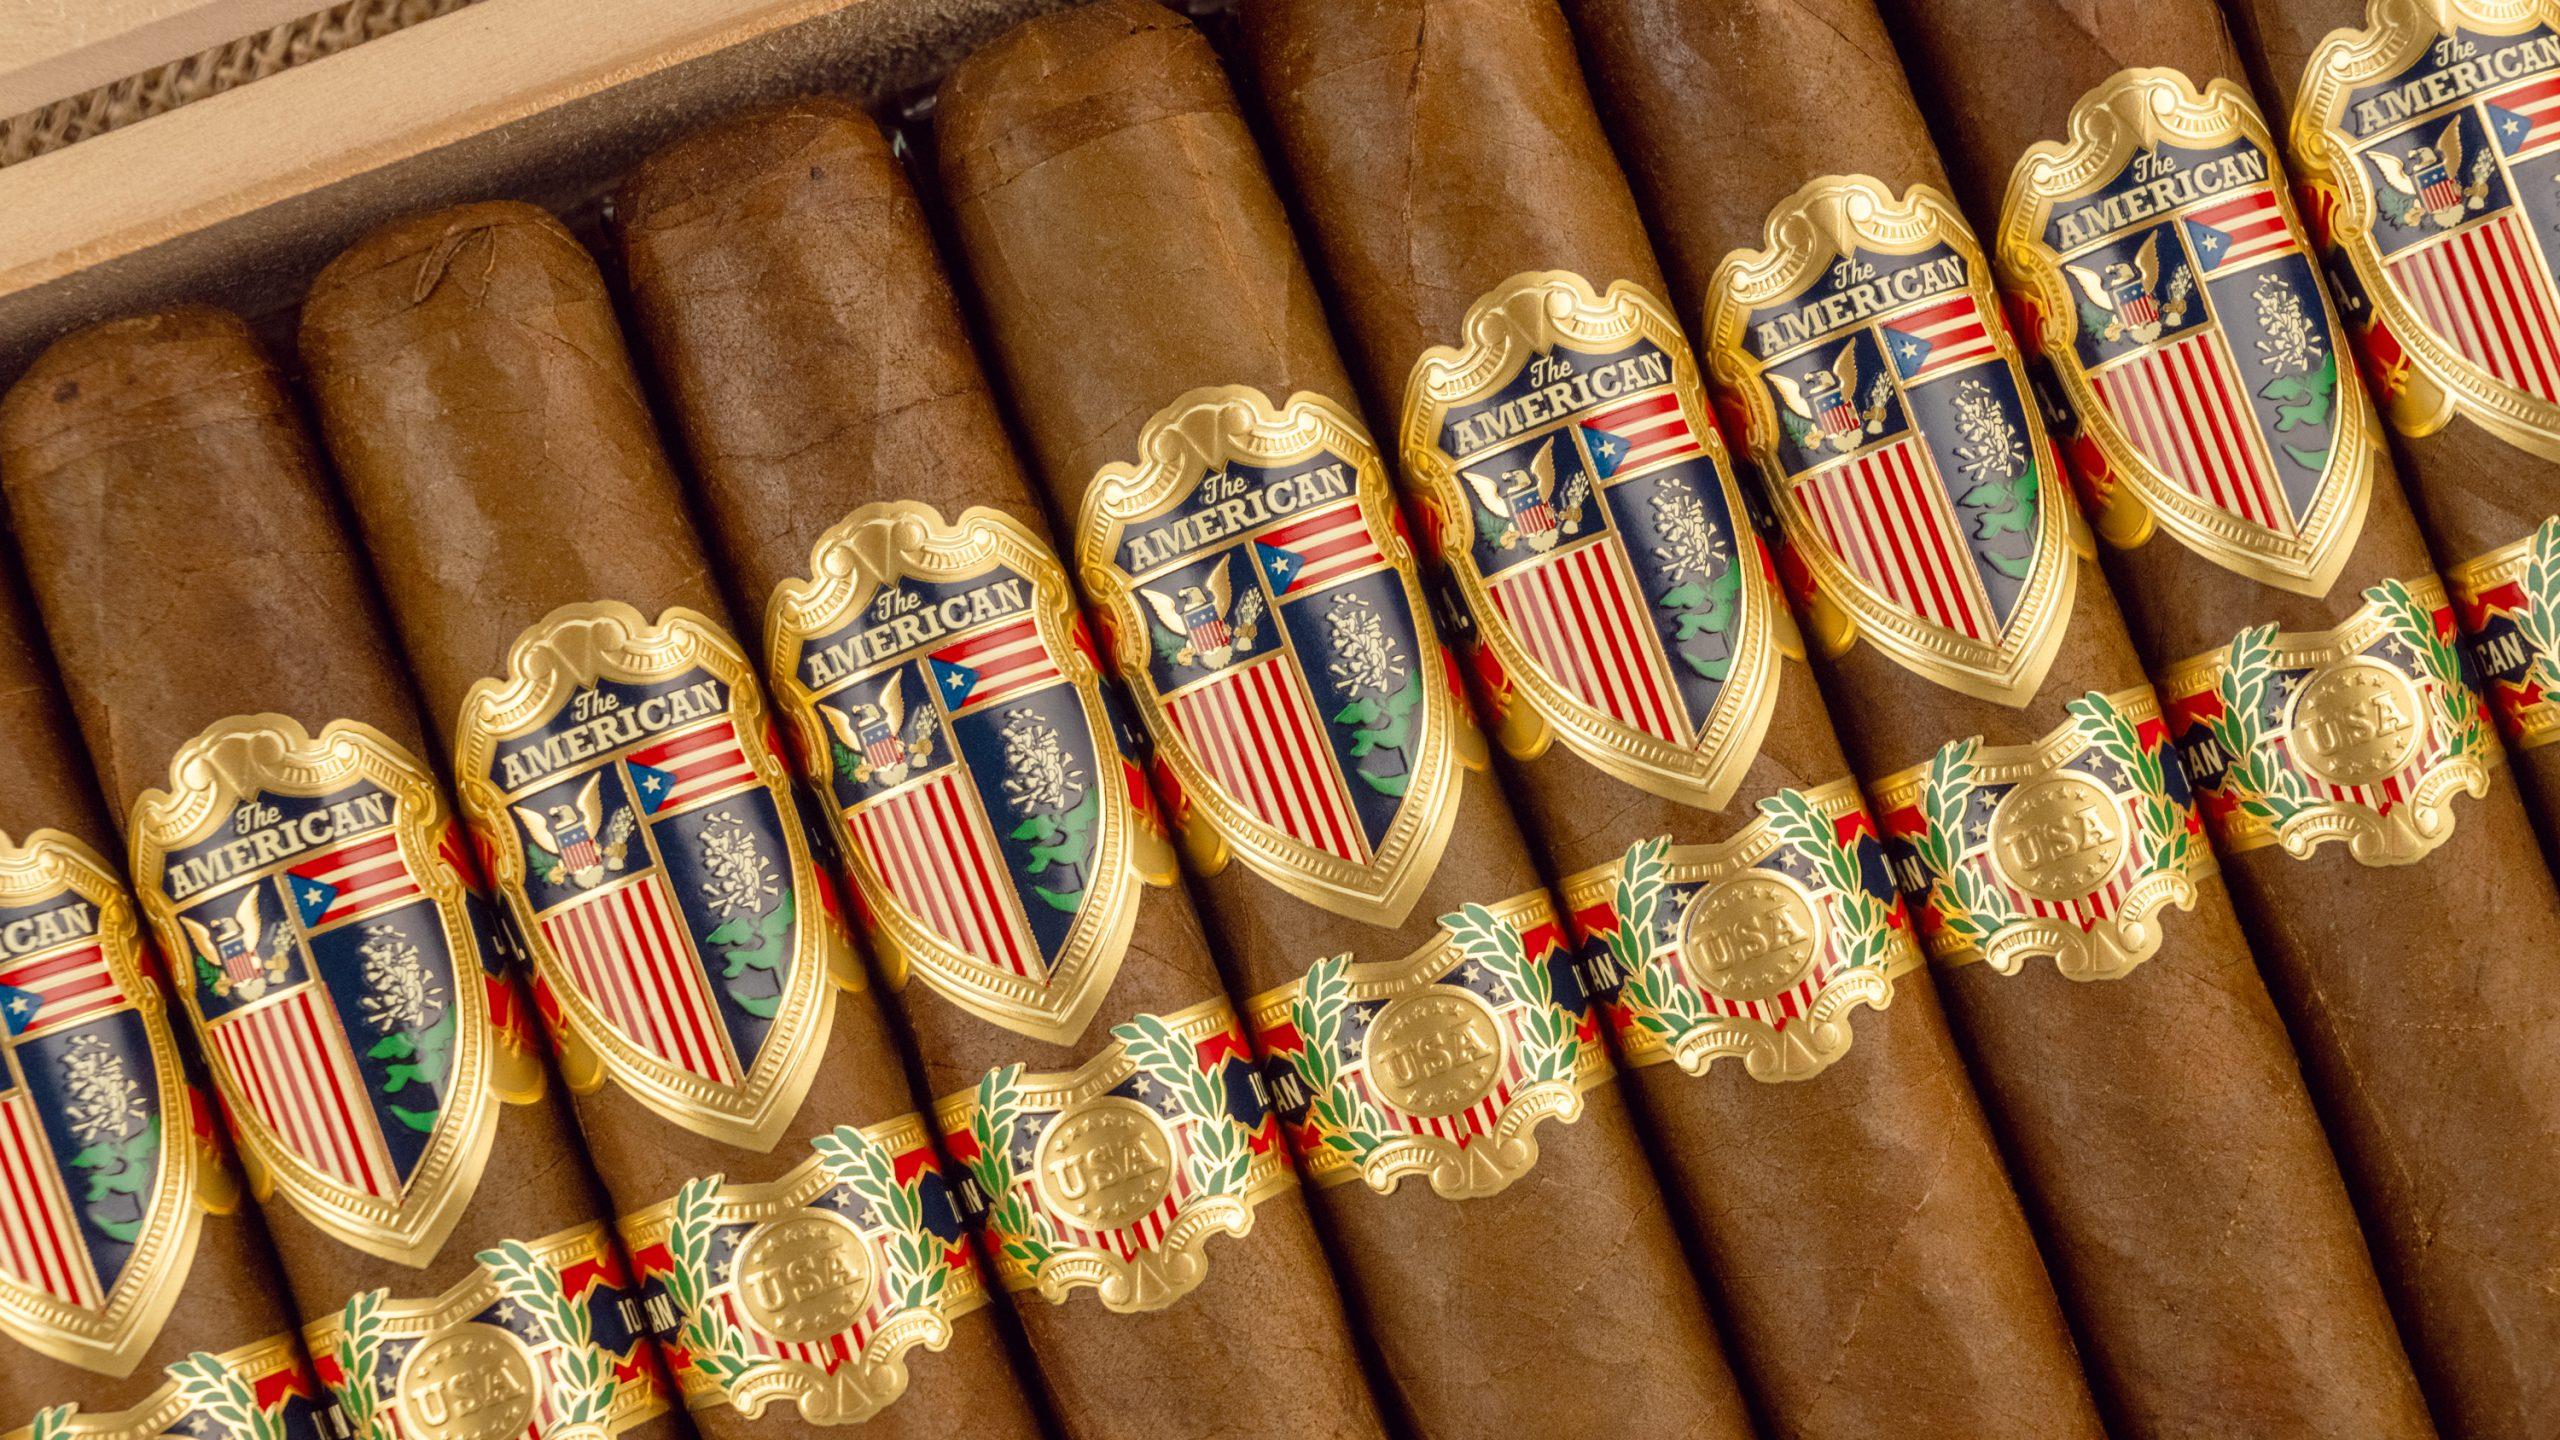 The American Cigar, Cigars Rolled in America